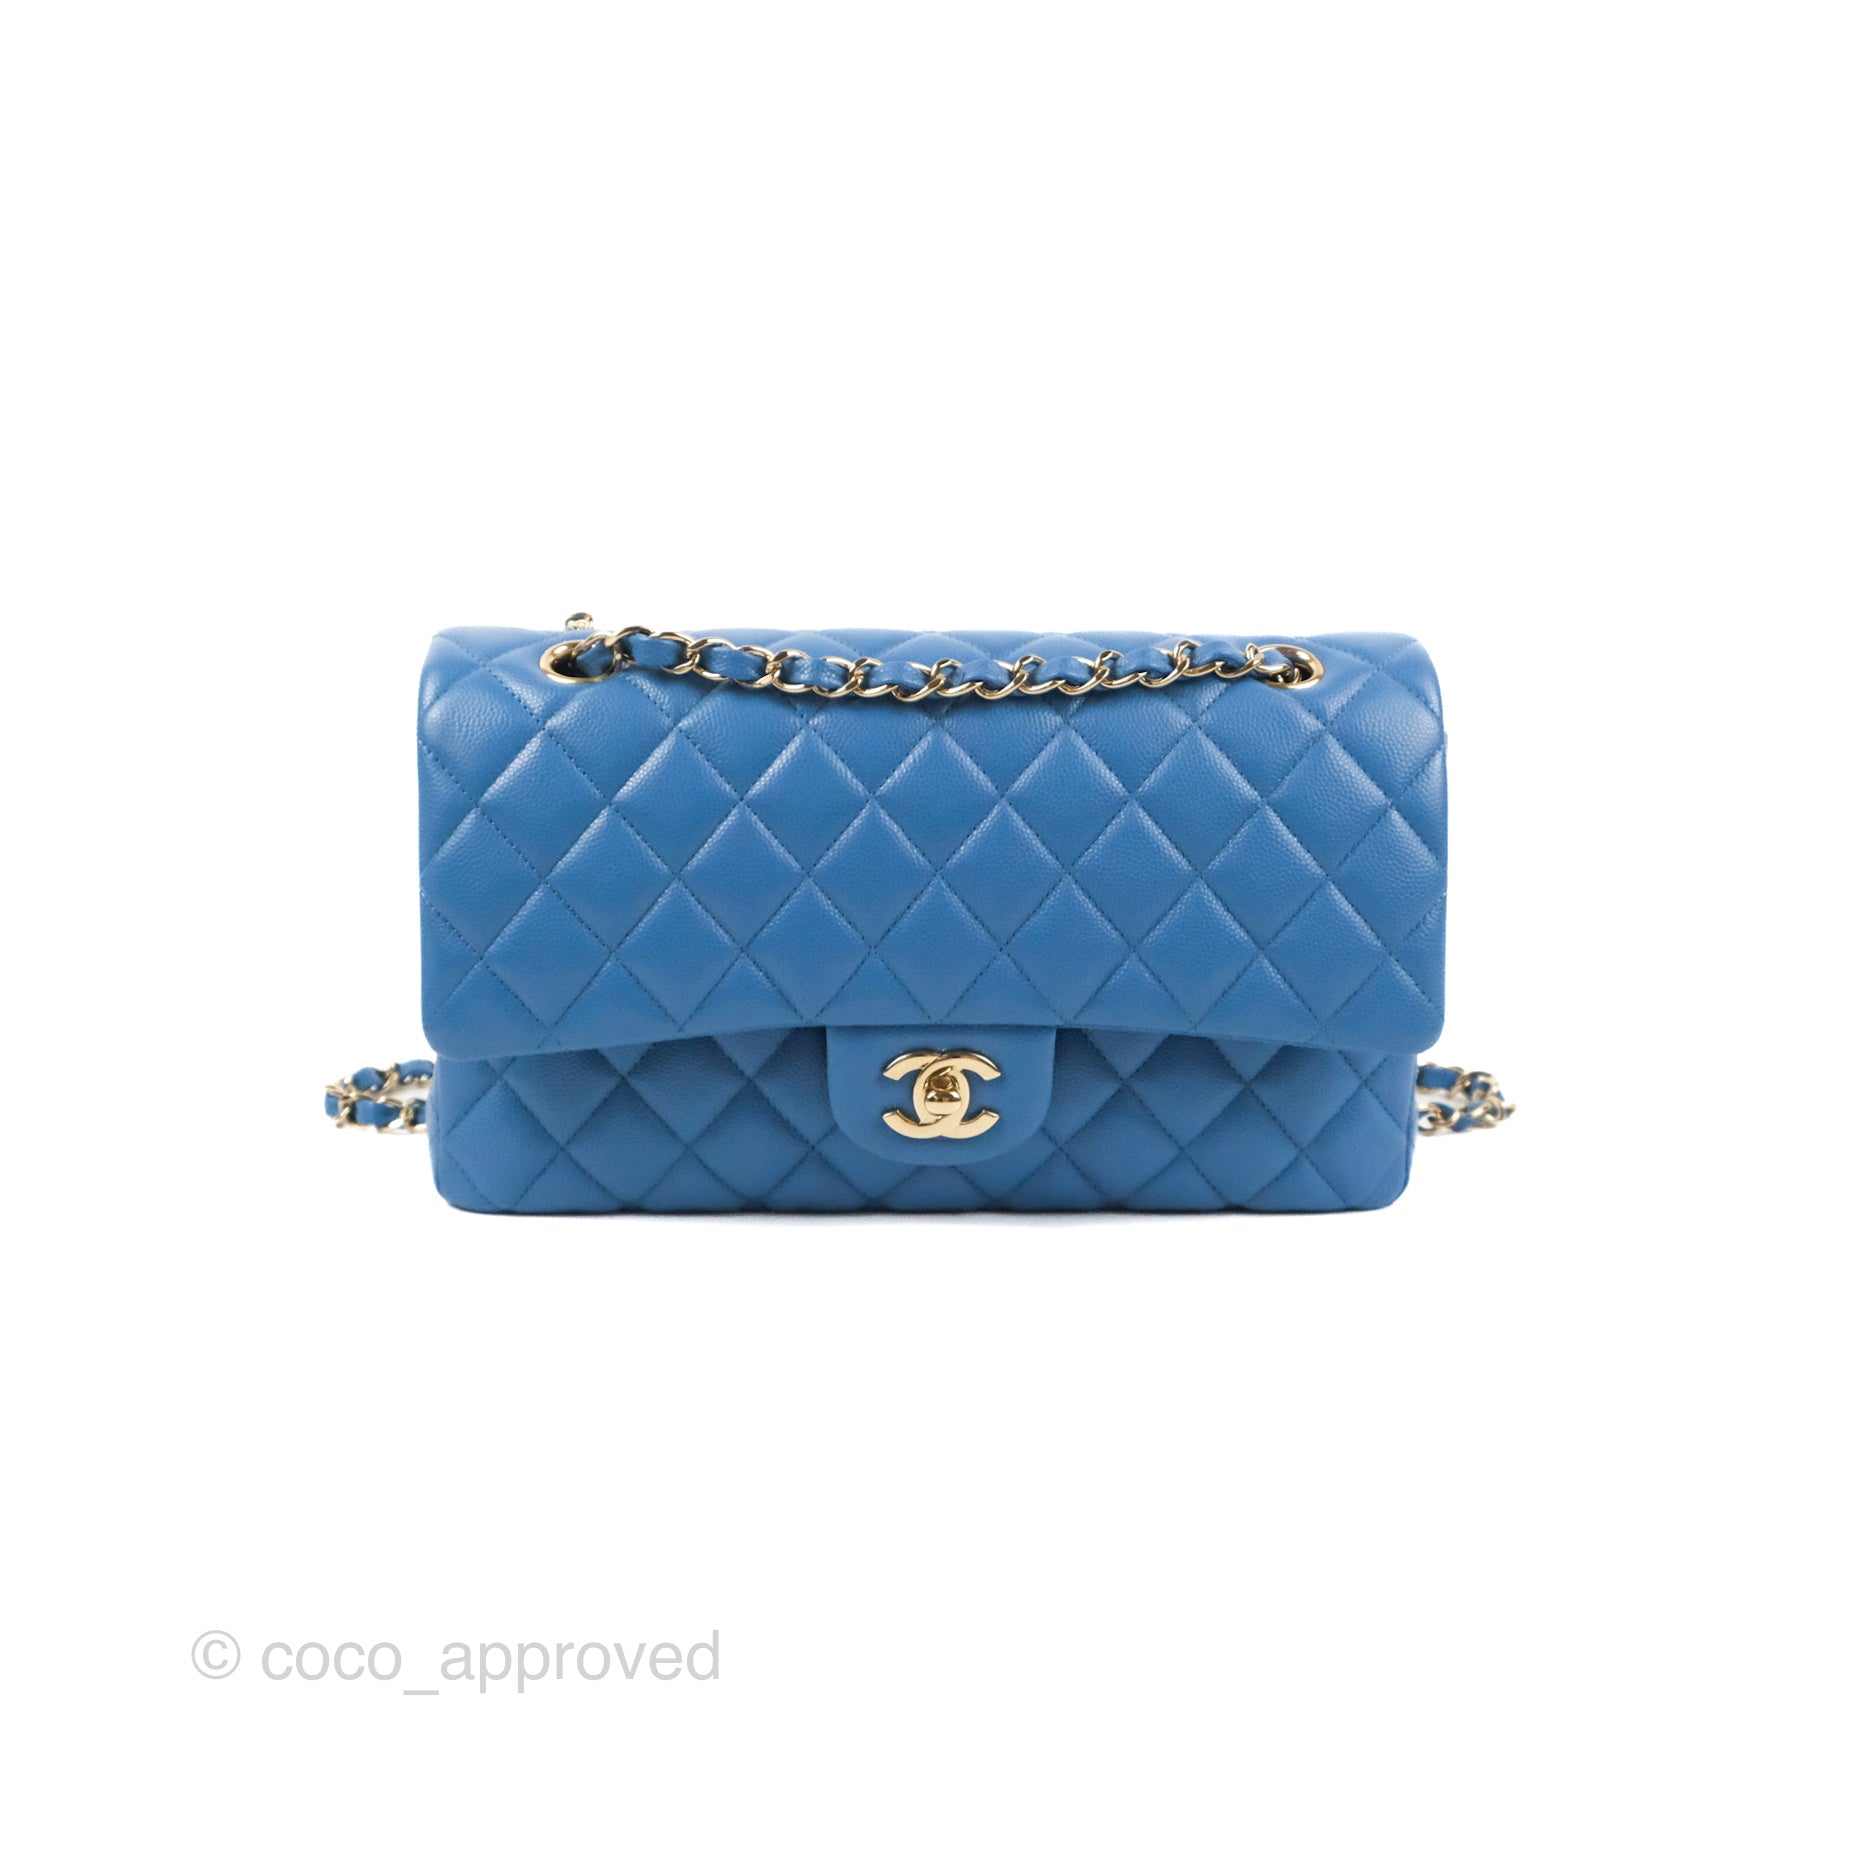 Chanel Mini Green Quilted Patent Rectangular Classic